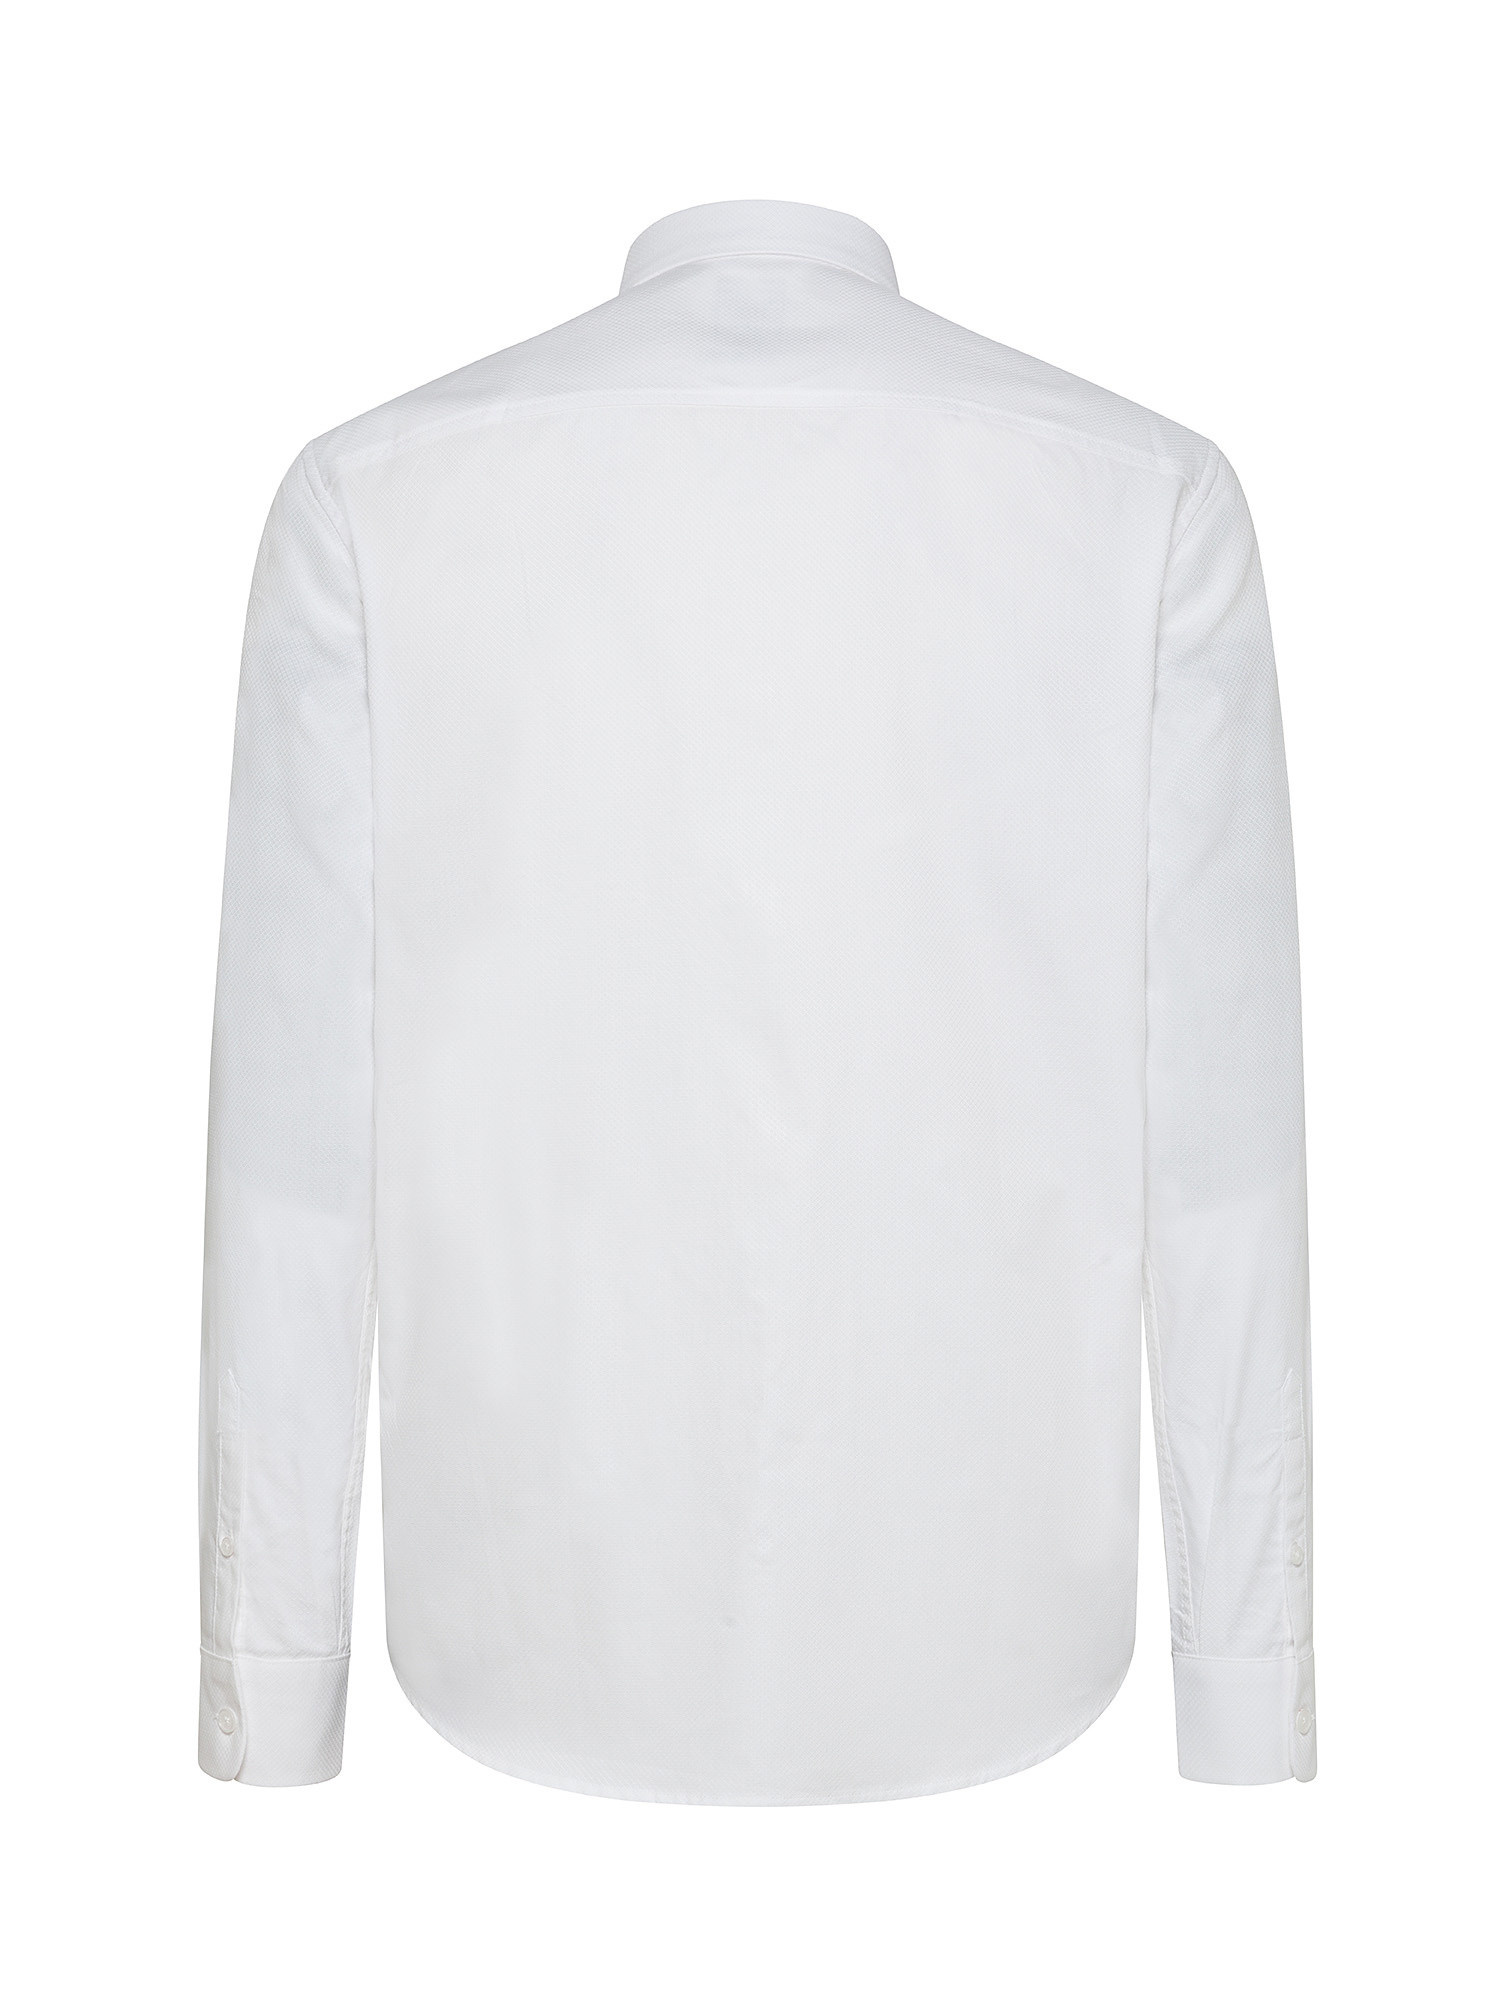 Armani Exchange - Camicia regular fit in cotone, Bianco, large image number 2